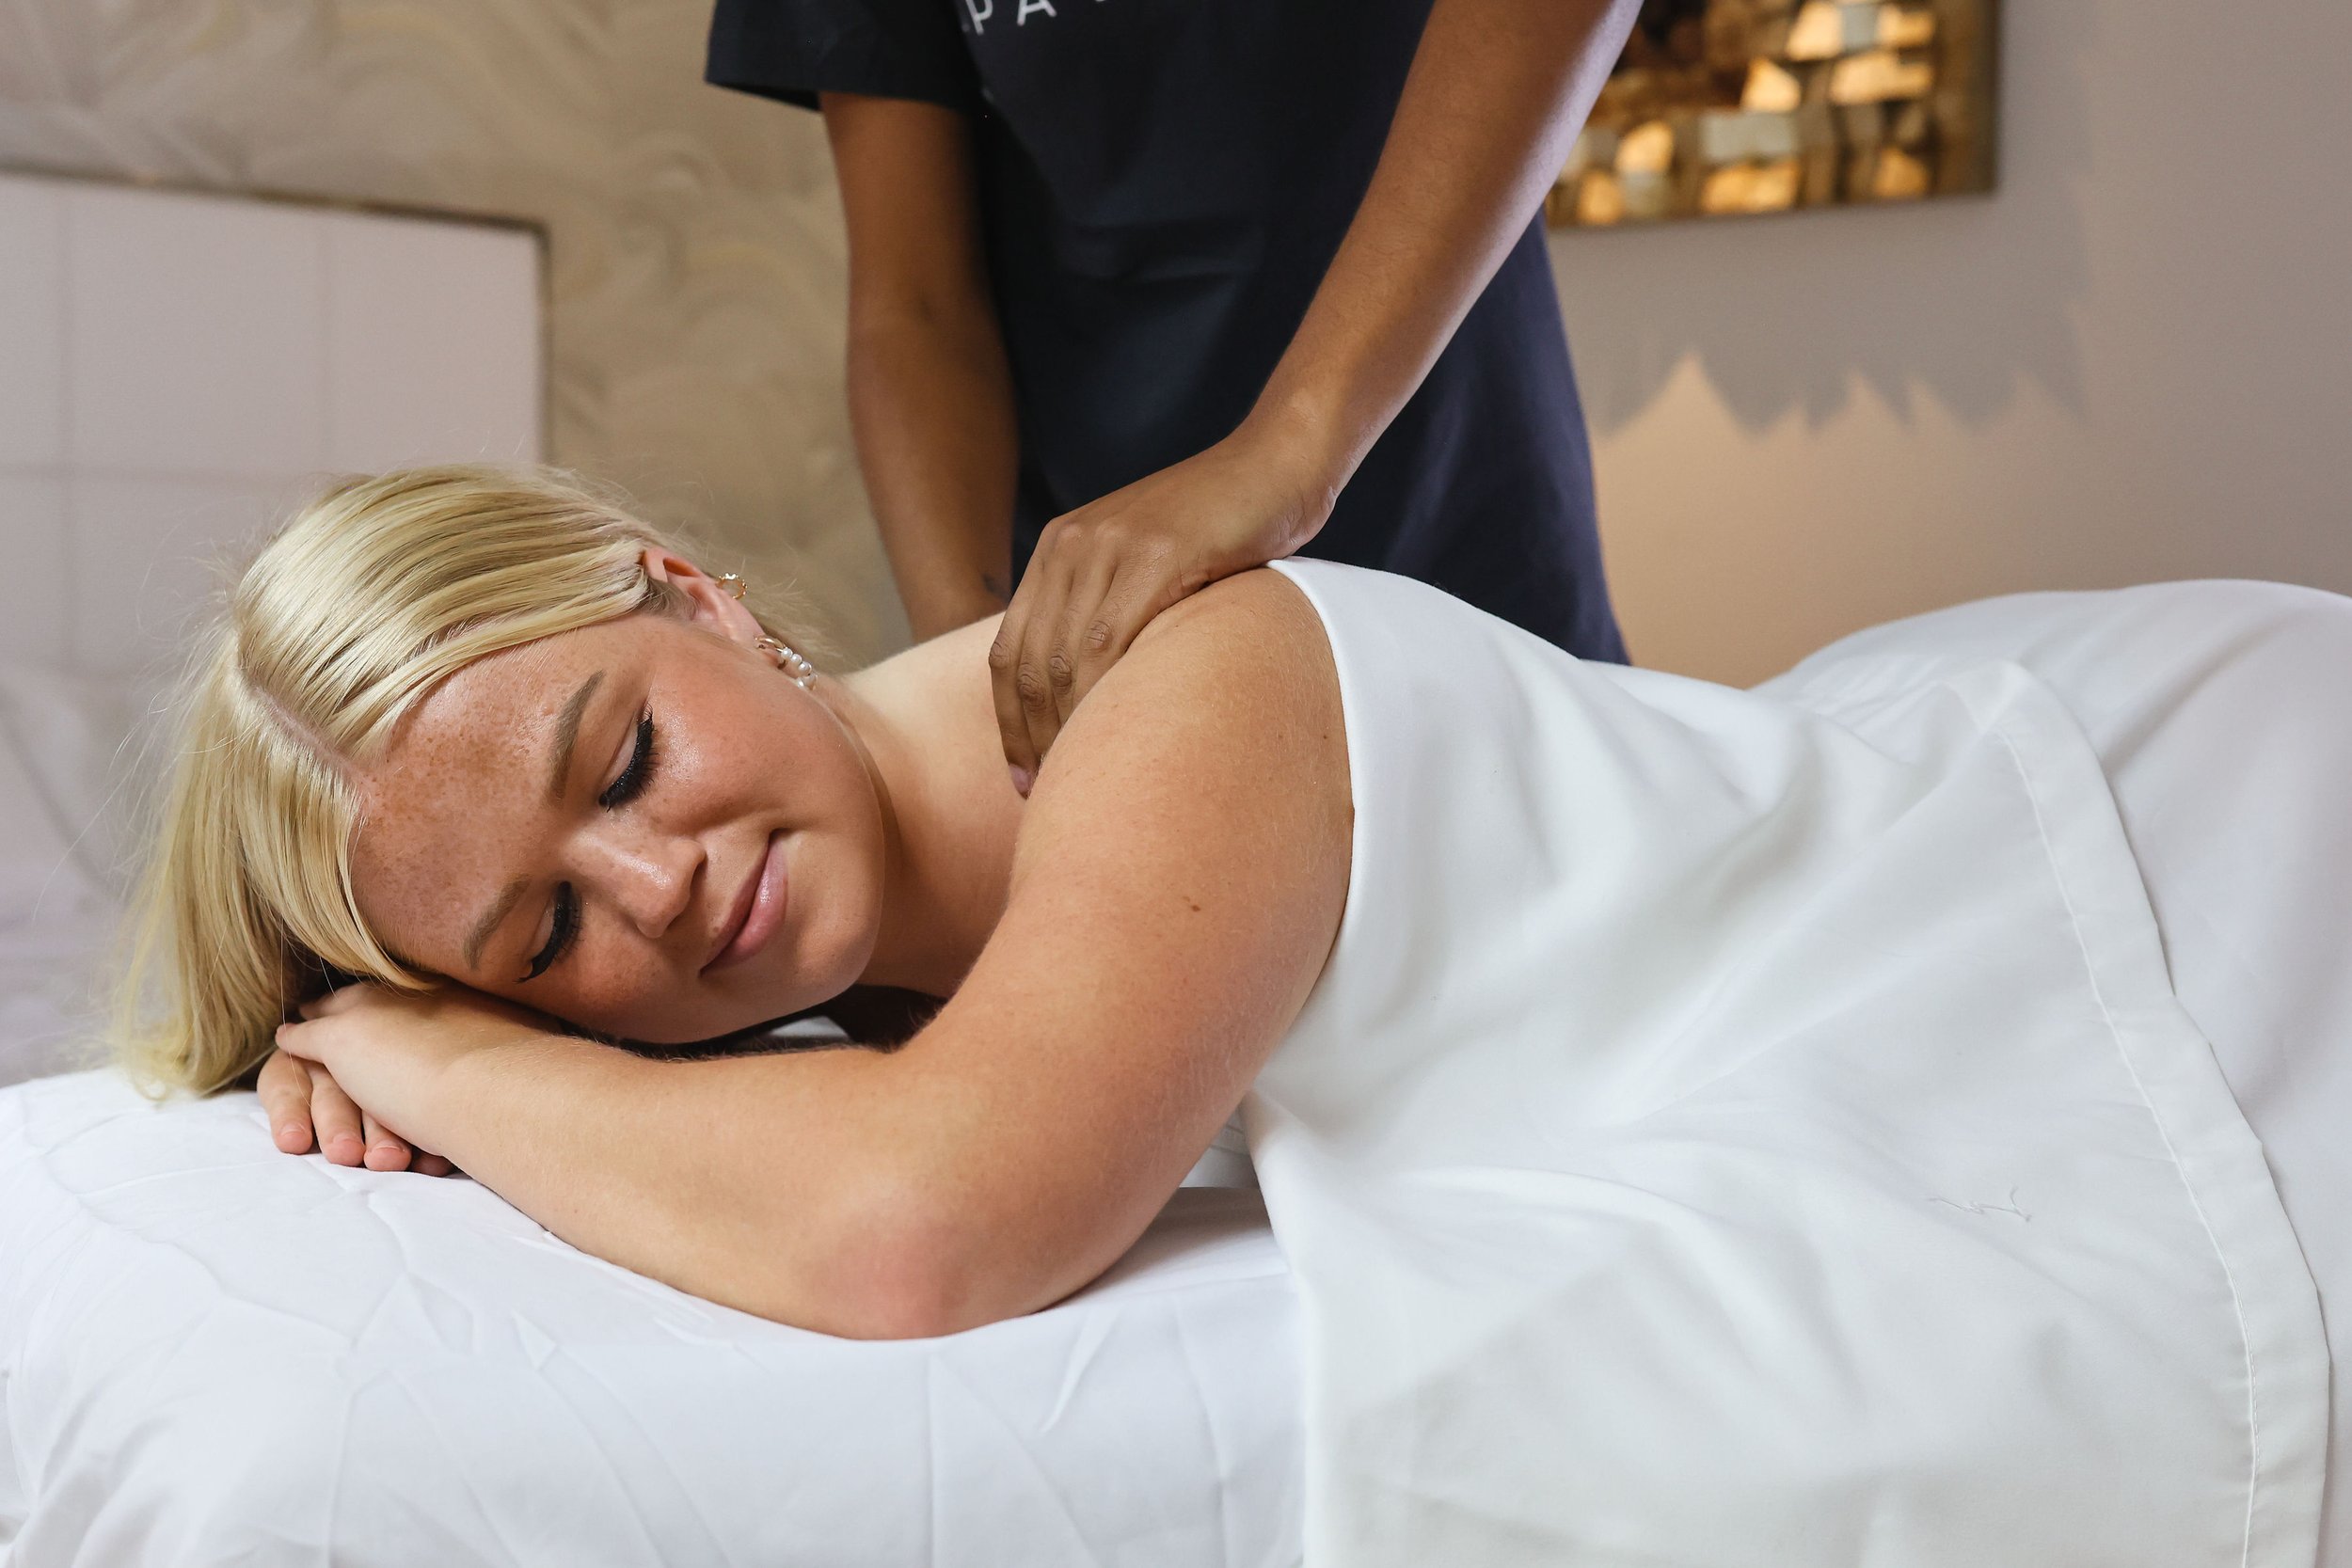 What Are Some Easy Self-Massage Techniques for Business Trips?